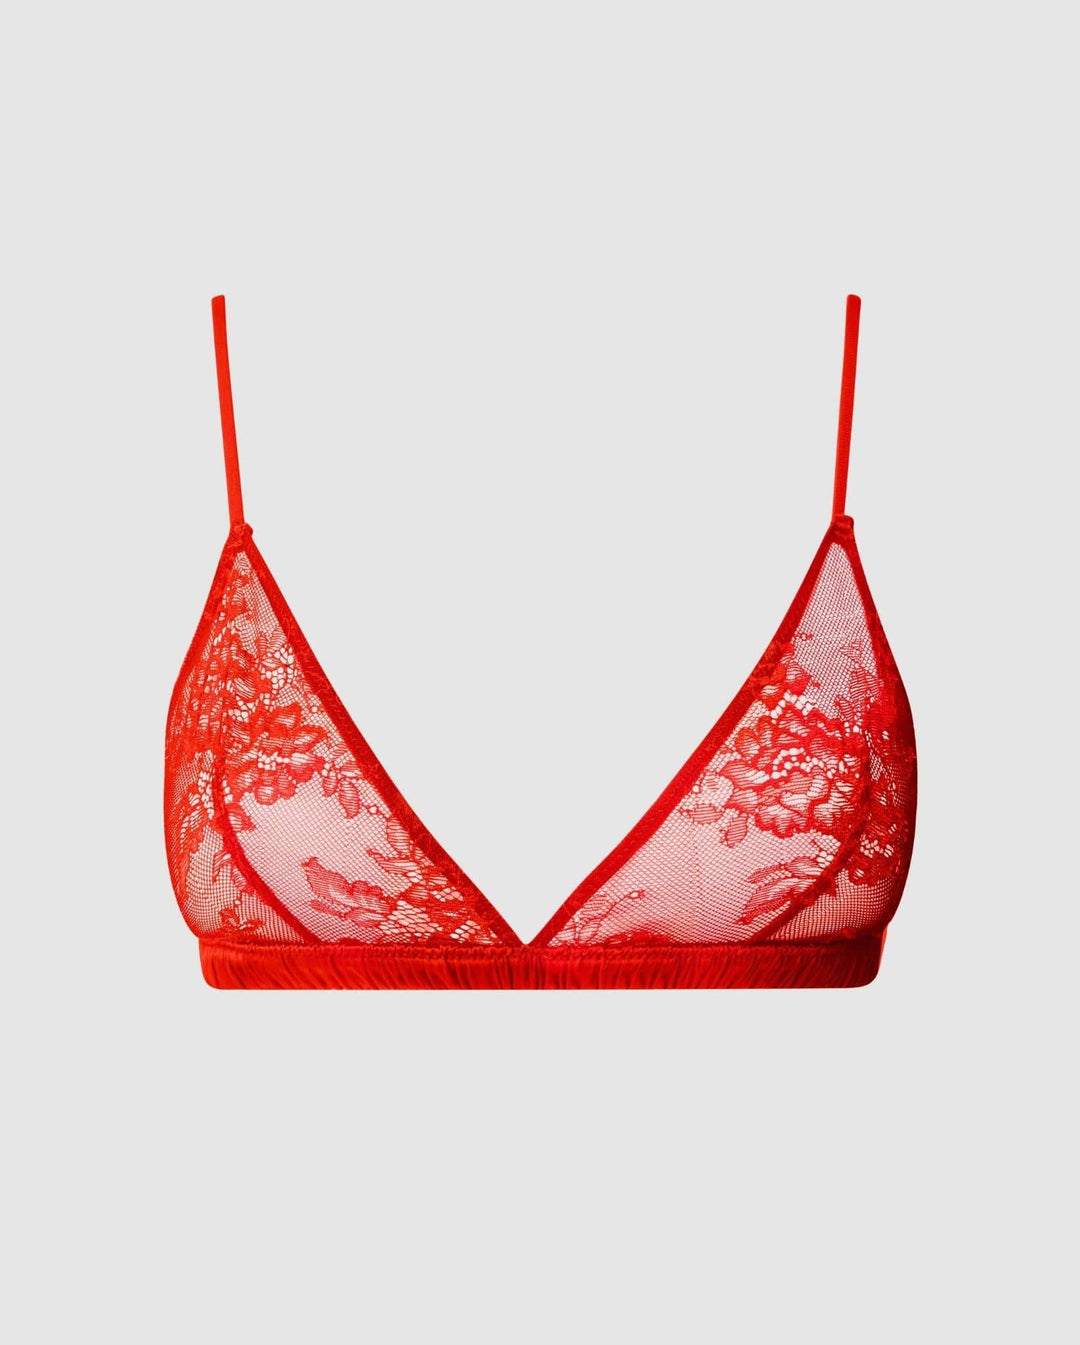 Red Lace Satin-look push-up Bra and panty set Size. 70B France